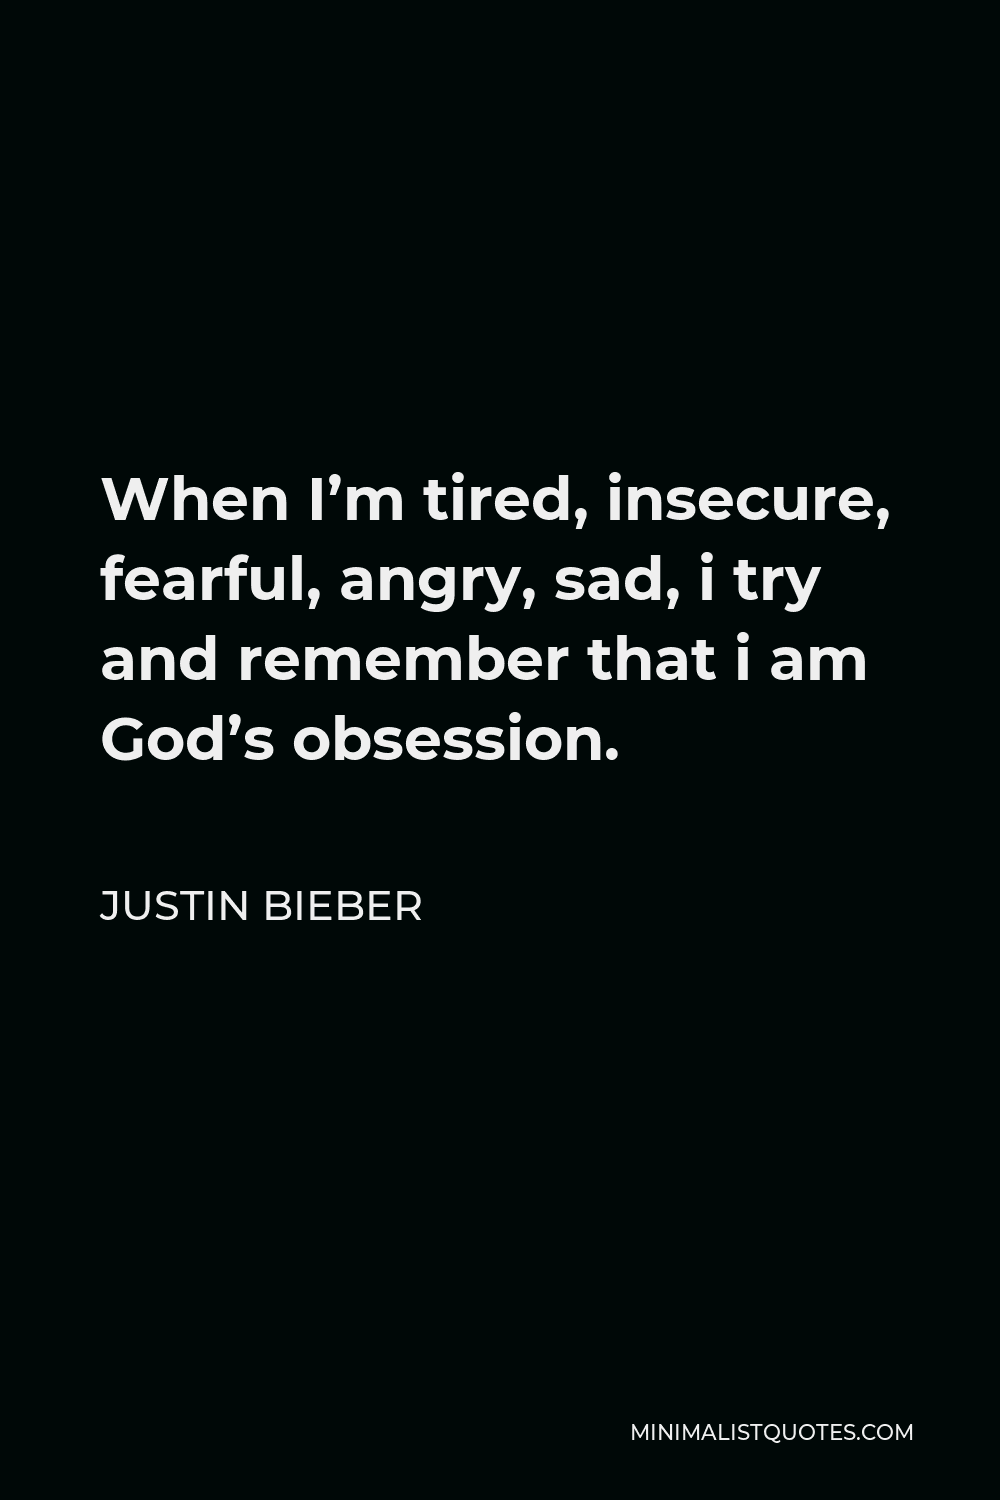 Justin Bieber Quote: When I'm tired, insecure, fearful, angry, sad ...